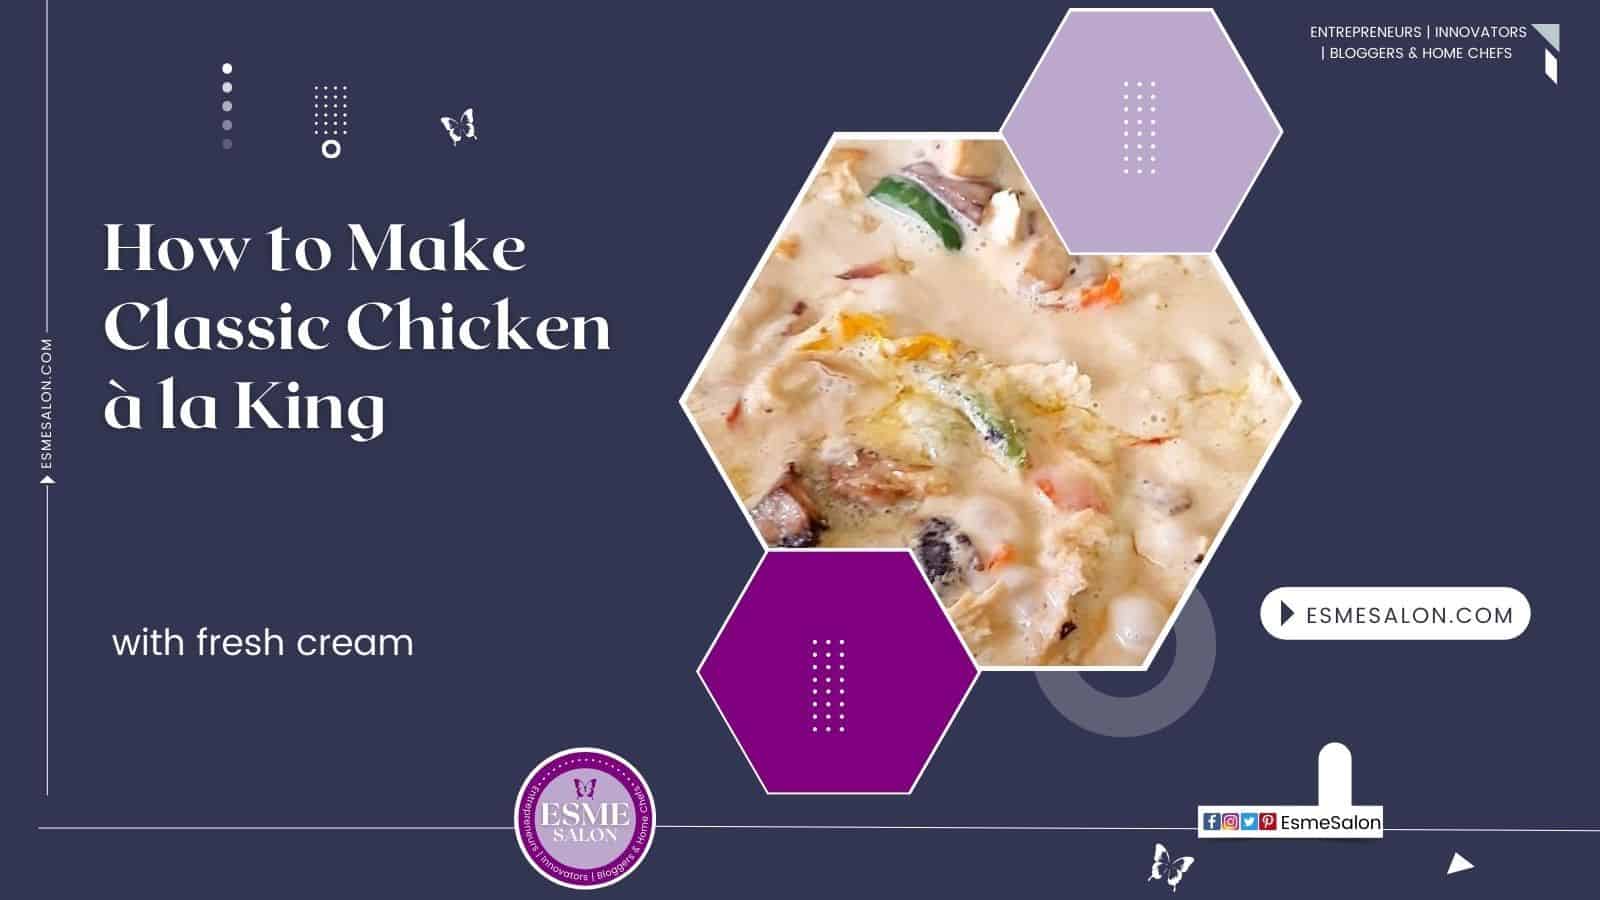 Chicken à la King is a dish consisting of diced chicken in a cream sauce, mushrooms, and vegetables, served over rice, noodles, or bread.